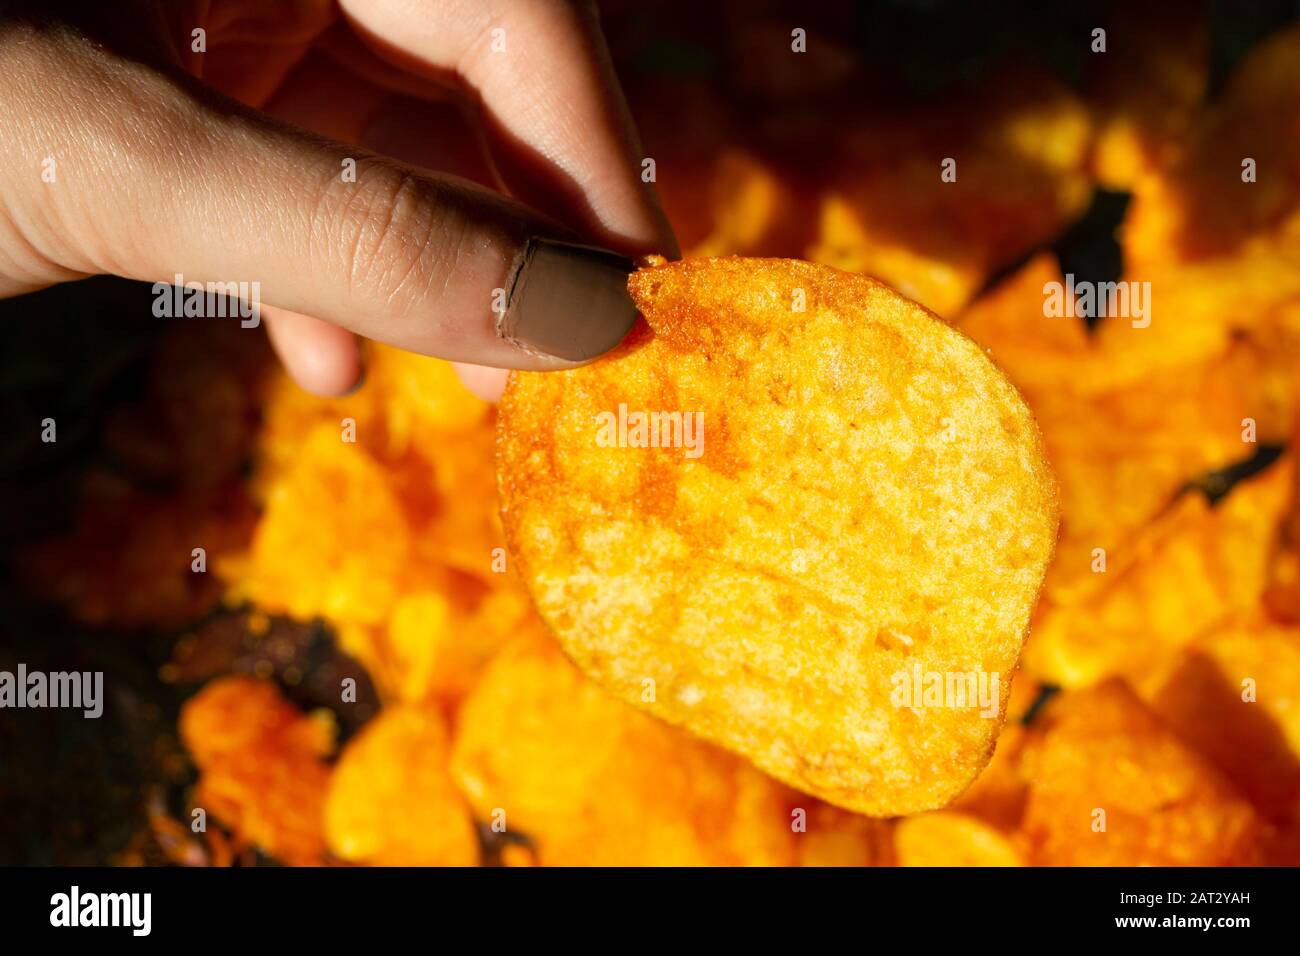 Woman eating chips snacks close up Stock Photo